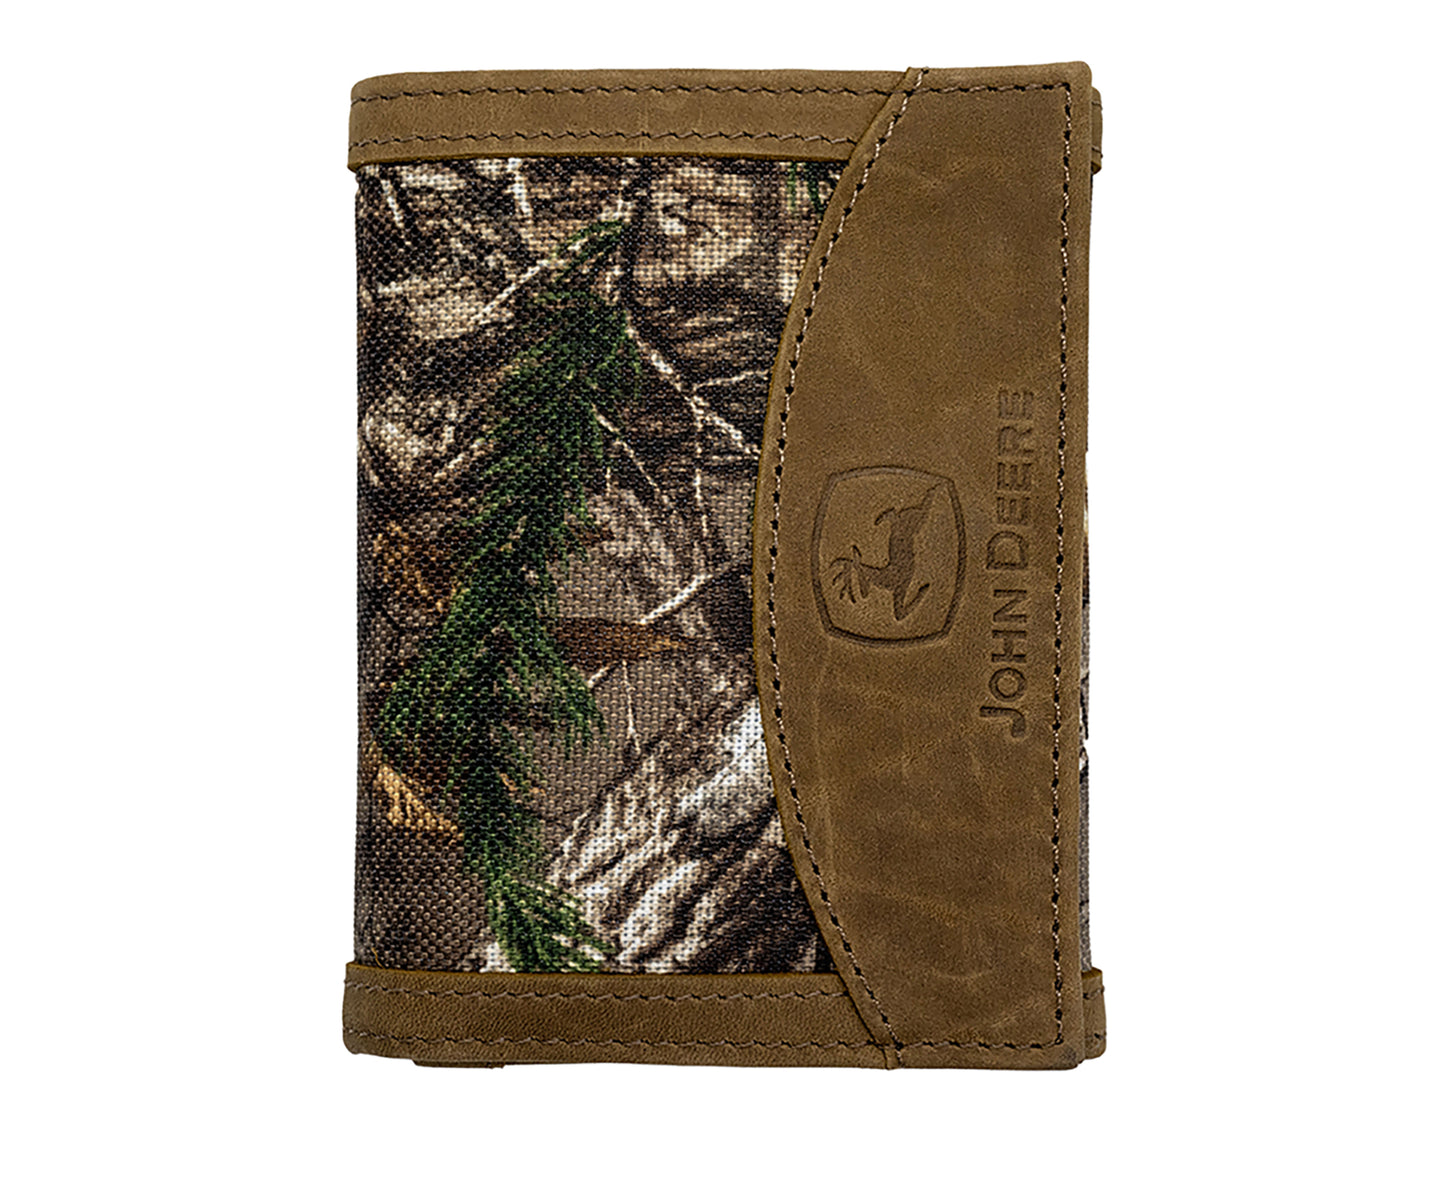 John Deere Tan & Camouflage Canvas & Leather Trifold Wallet - 4030000-957